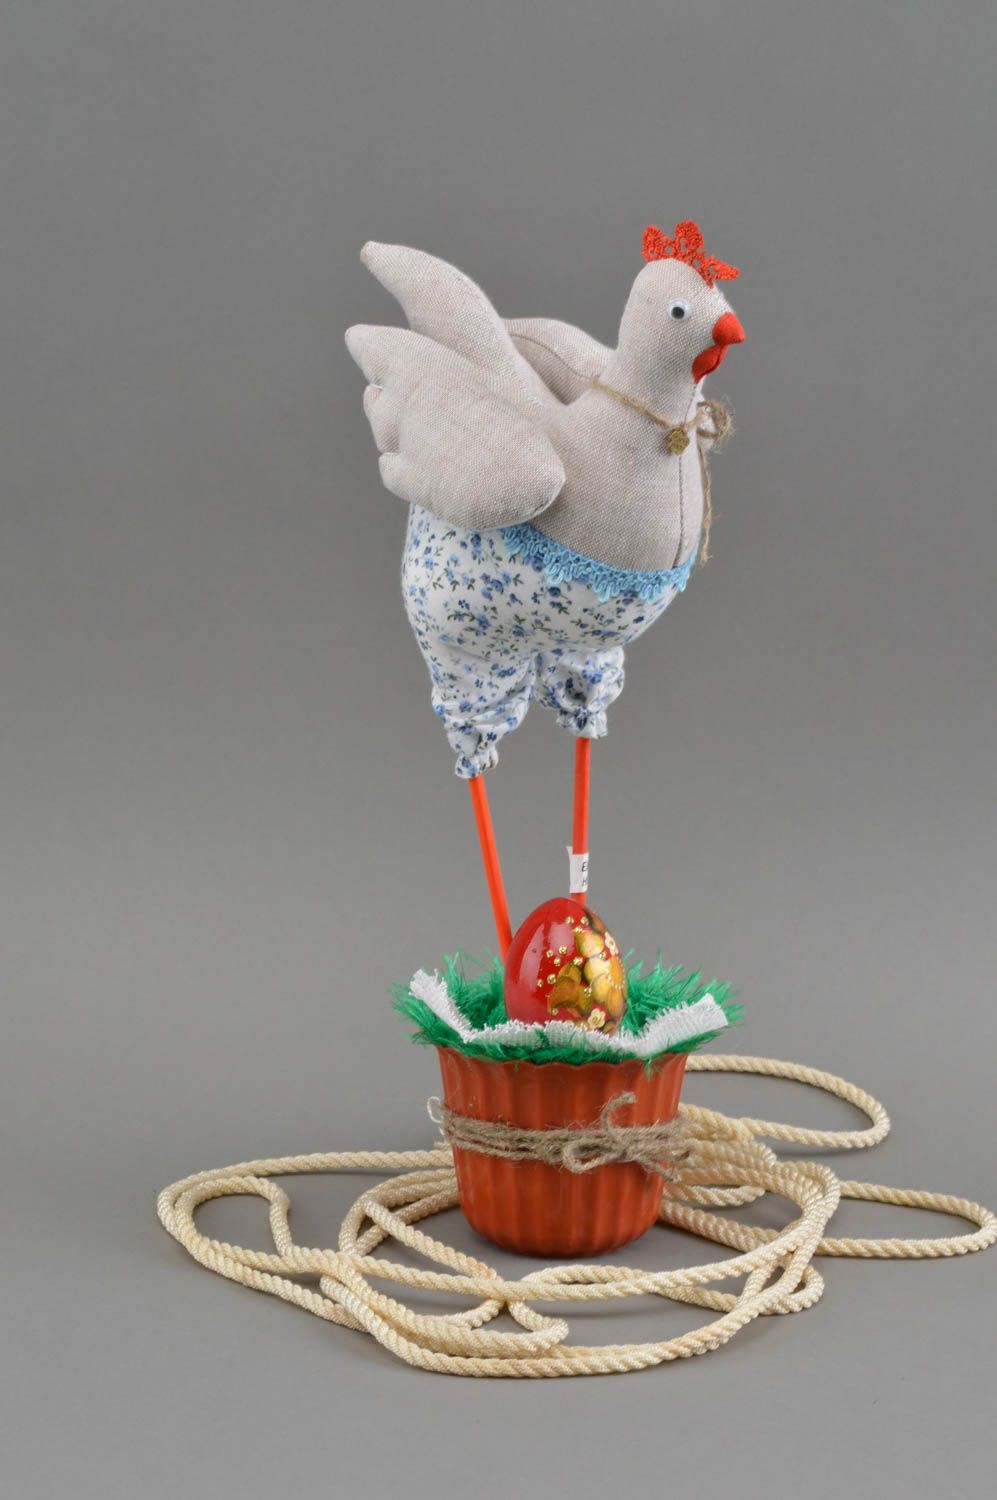 Interior soft toy handmade Eater composition chicken with egg Easter decor ideas photo 1